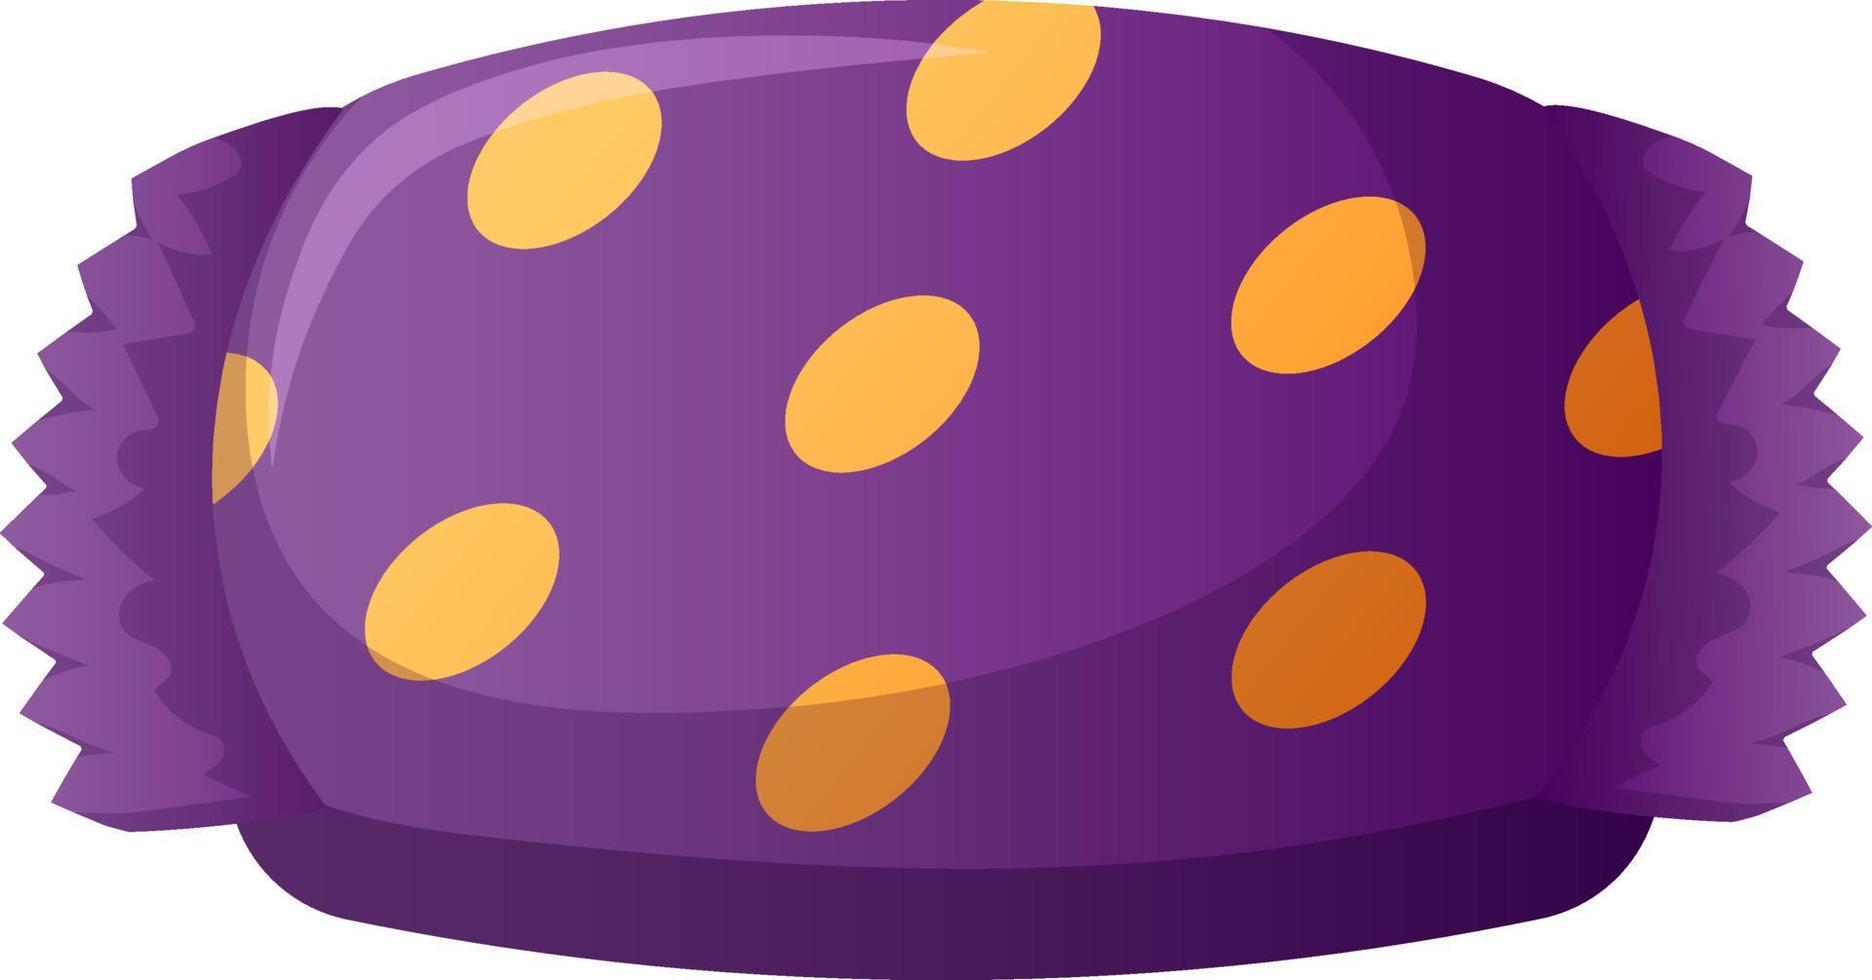 Purple candy with polka dot packaging for halloween isolated vector